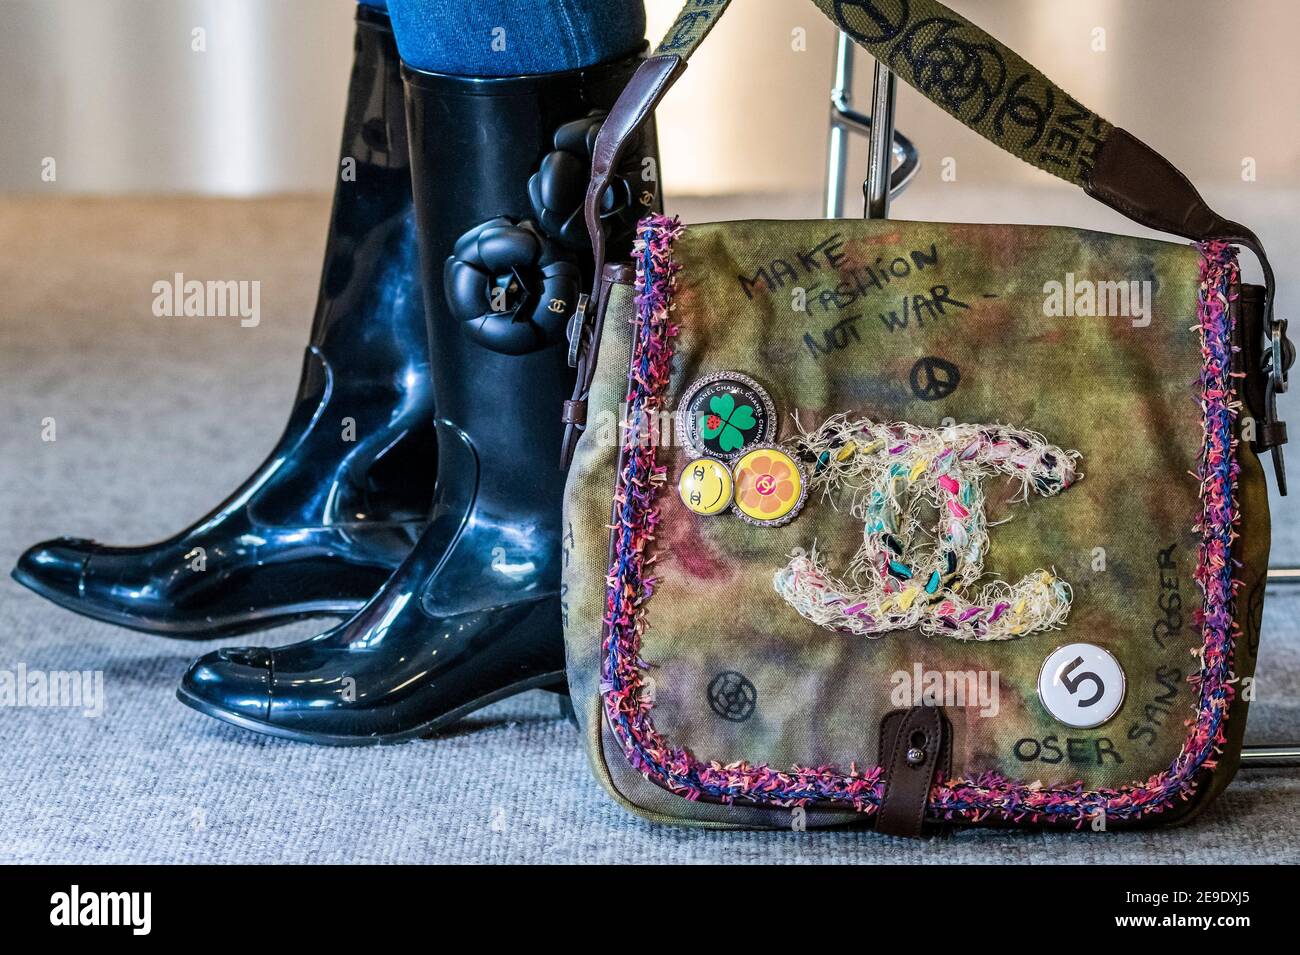 London, UK. 4 Feb 2021. Designer Wellington Boots by Chanel with Camellia  design (part of a set of 2 pairs) est £200-300 with a Graffiti On The  Pavements Messenger Bag, Spring 2015,